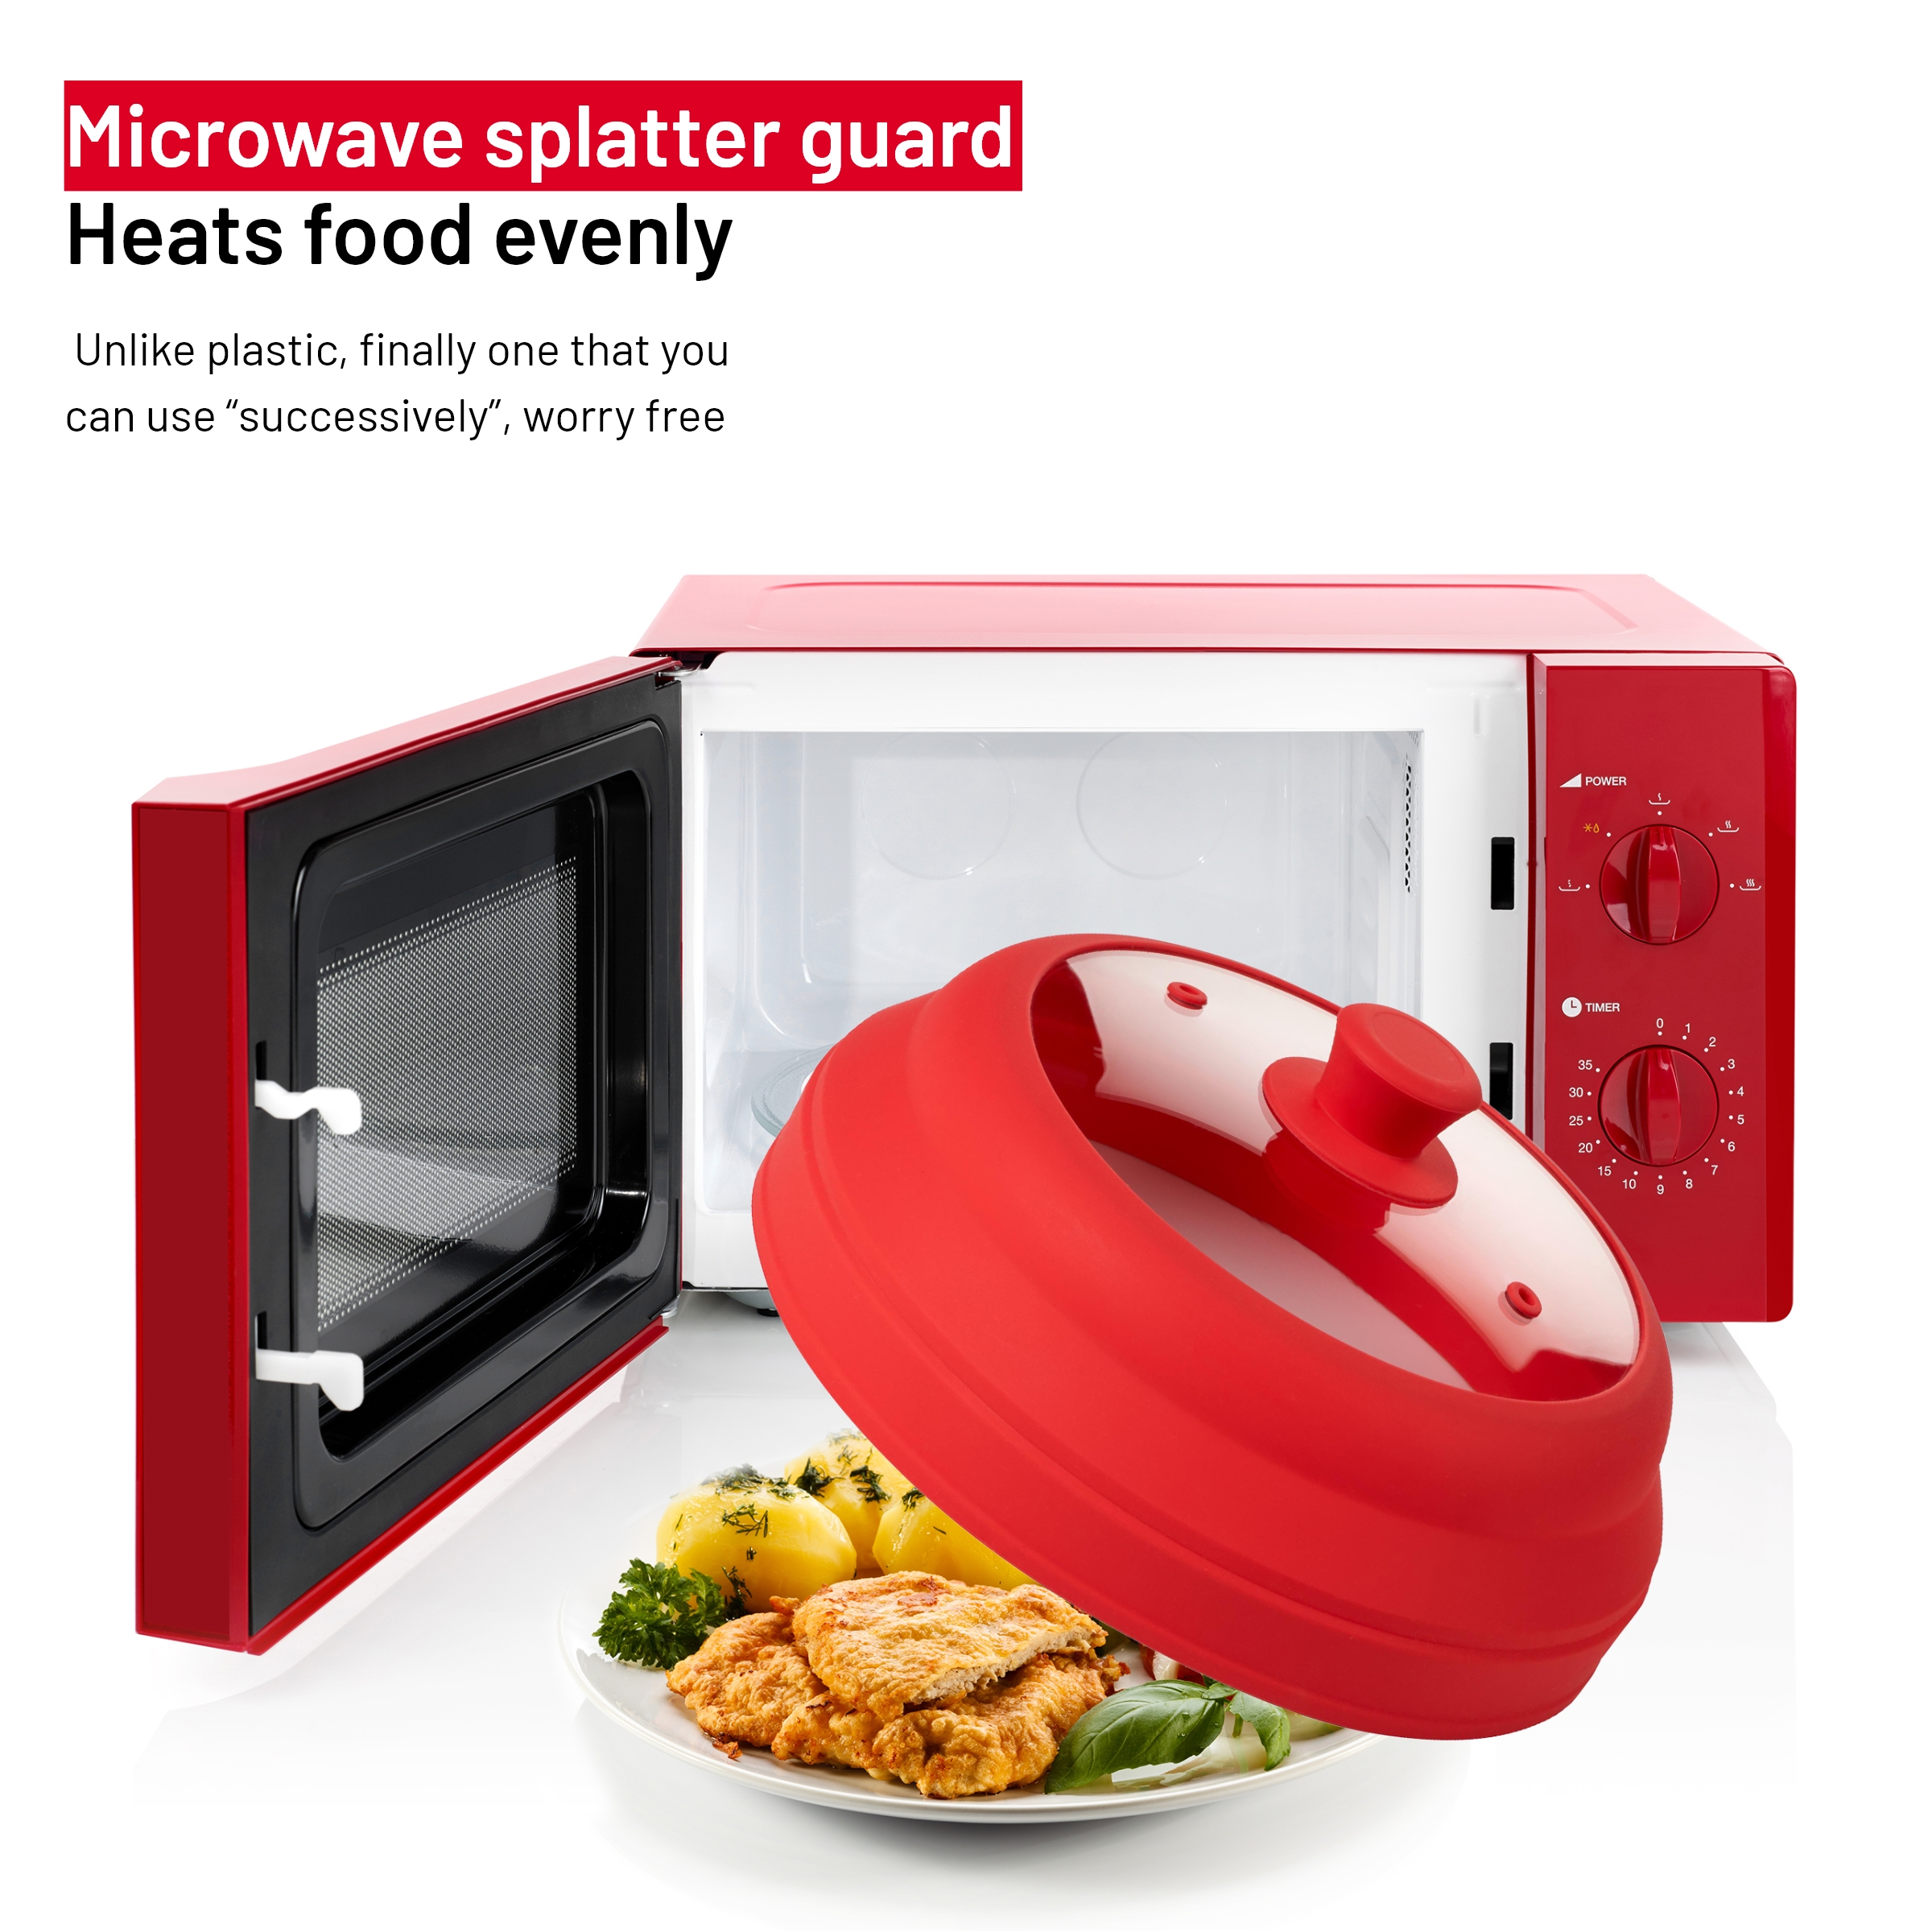 Flippable Microwave Cover for Food, Dish, Higher Microwave Plate Cover for  Heating, Stay-Inside Splatter Guard for Microwave Oven, Innovative Lid